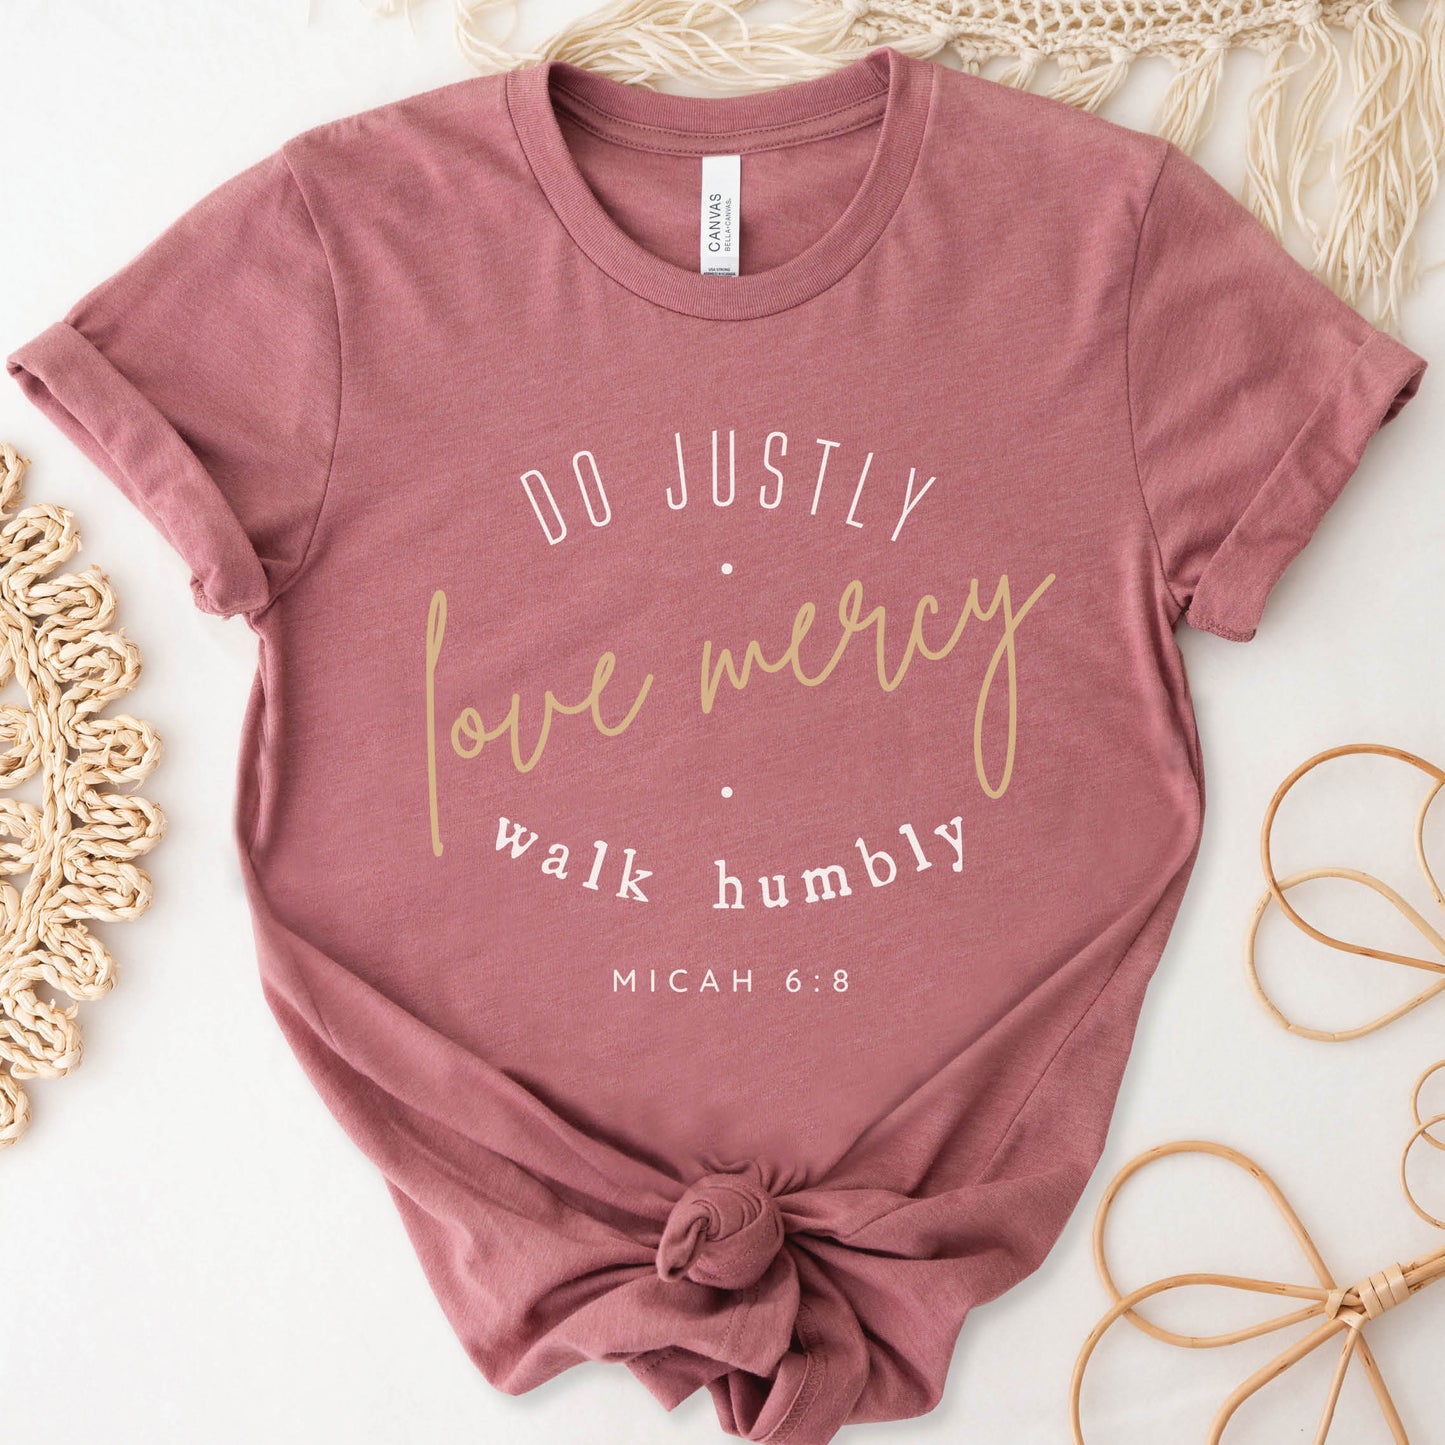 Mauve Dusty Pink Christian aesthetic faith-based unisex t-shirt for women with Micah 6:8 bible verse scripture printed that says, Do Justly Love Mercy walk humbly in gold and white, designed for women in sizes small thru 4X